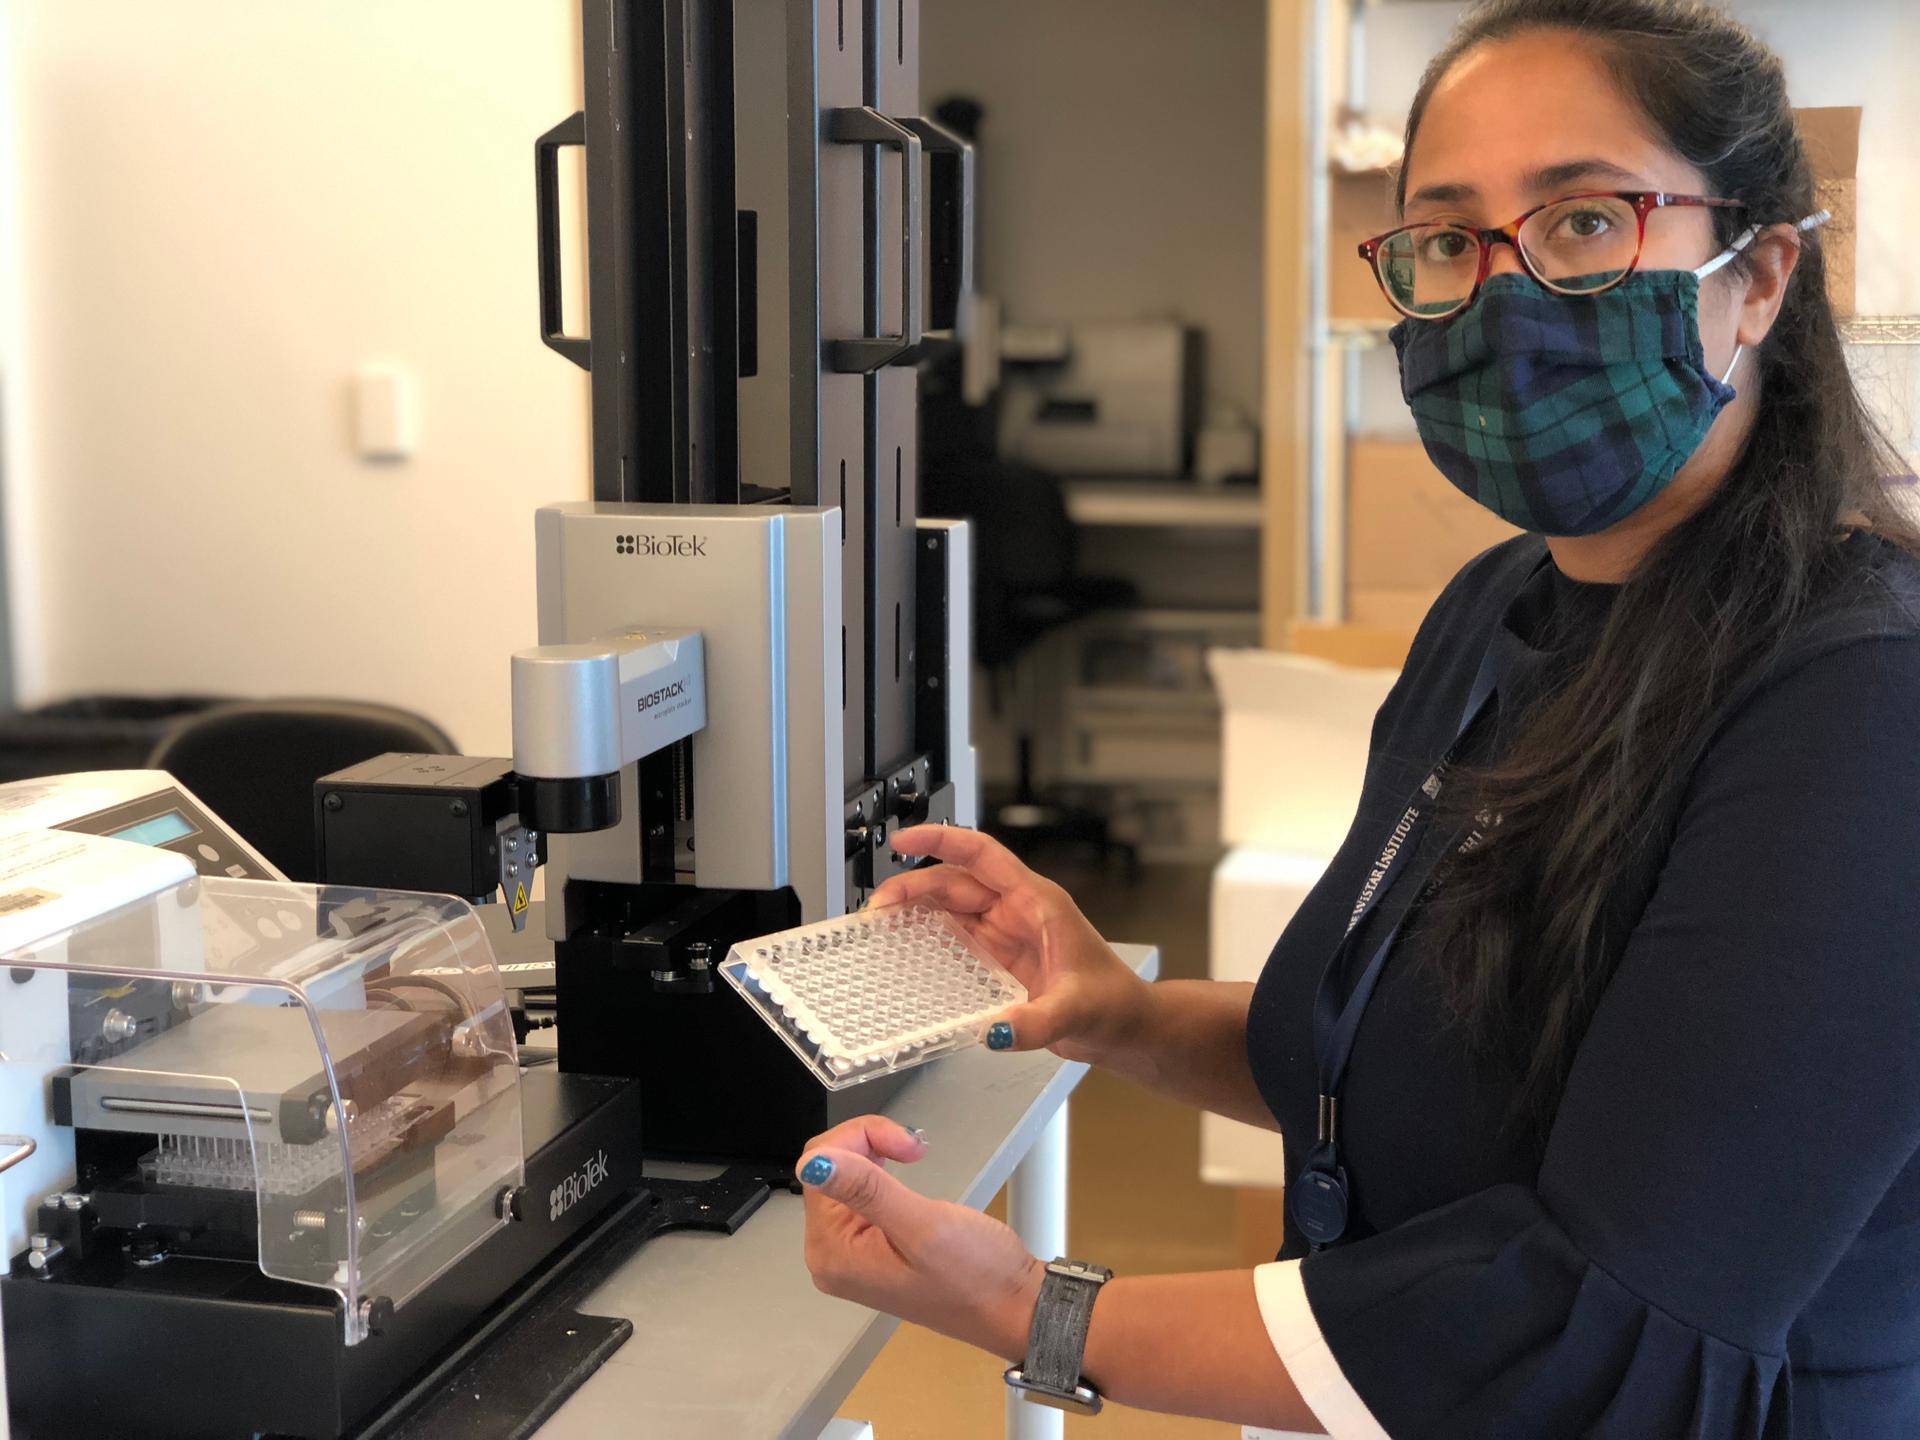 Ami Patel, a scientist at The Wistar Institute in Philadelphia, Pennsylvania, holds a “plate” used to test blood serum samples for antibodies from vaccines the lab is developing. One of them is for COVID-19.